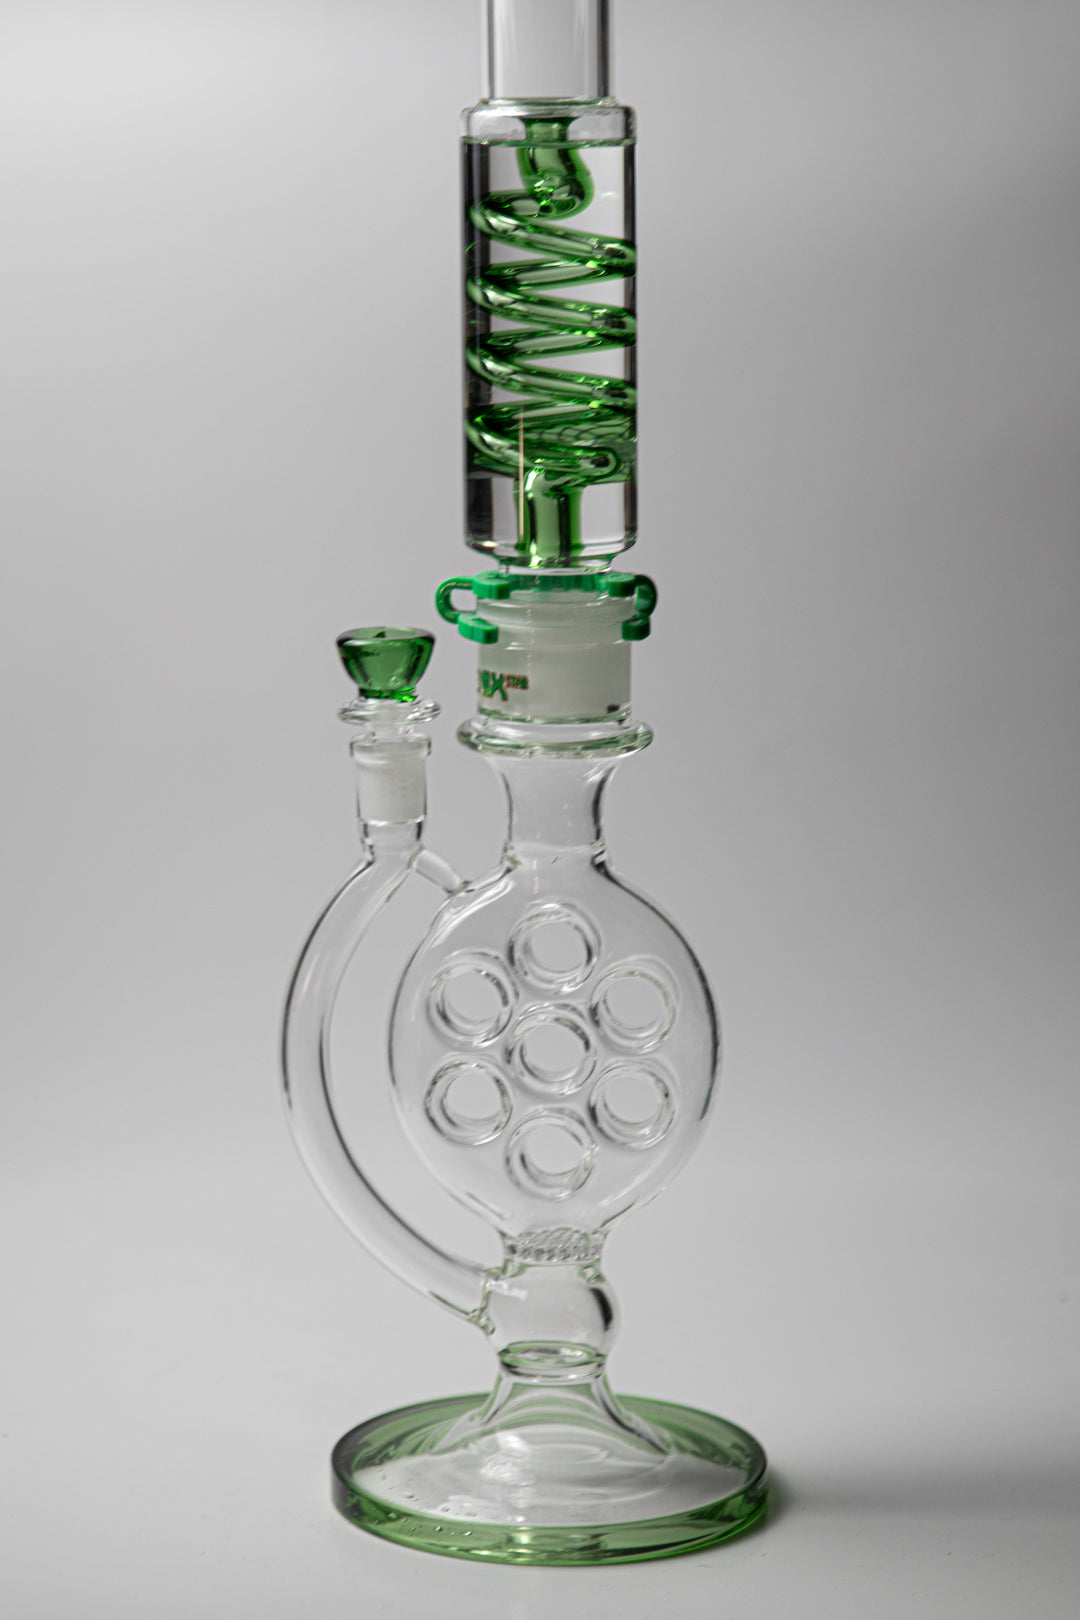 Phoenix Swiss Divided Green Water Pipe – a 21-inch rig for weed and dabs. Now available for sale, this standout piece boasts a striking design, a bowl piece for weed, a bent-down stem, recycler percolator, and a small honeycomb percolator. The incorporated percolators ensure a smooth, cool smoke, preventing water from splashing back . Color green 